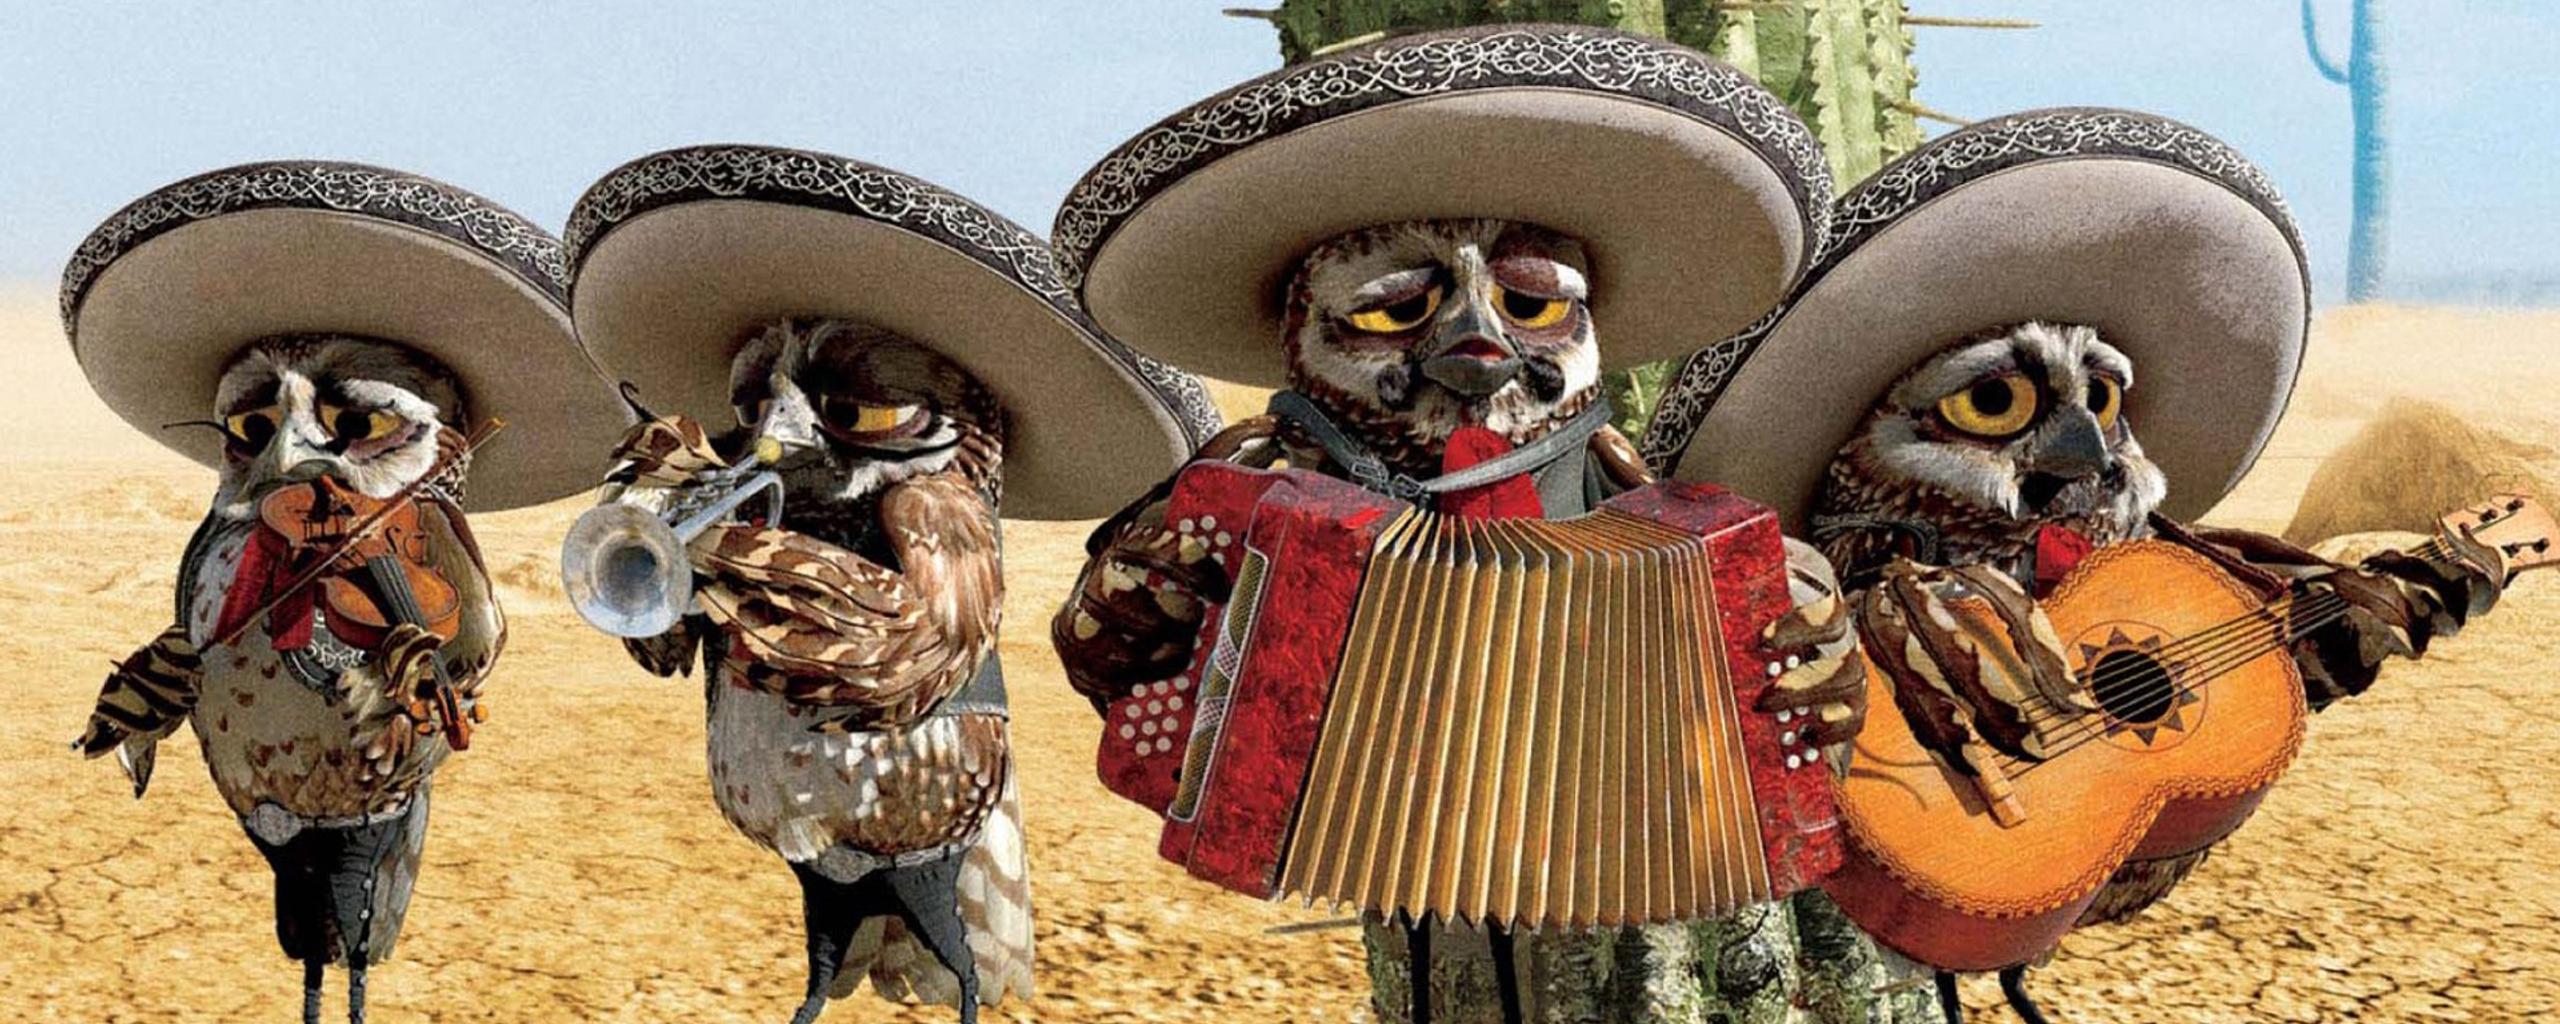 Download Rango movie - Four owls in a band in the desert Dual 1280x1024.